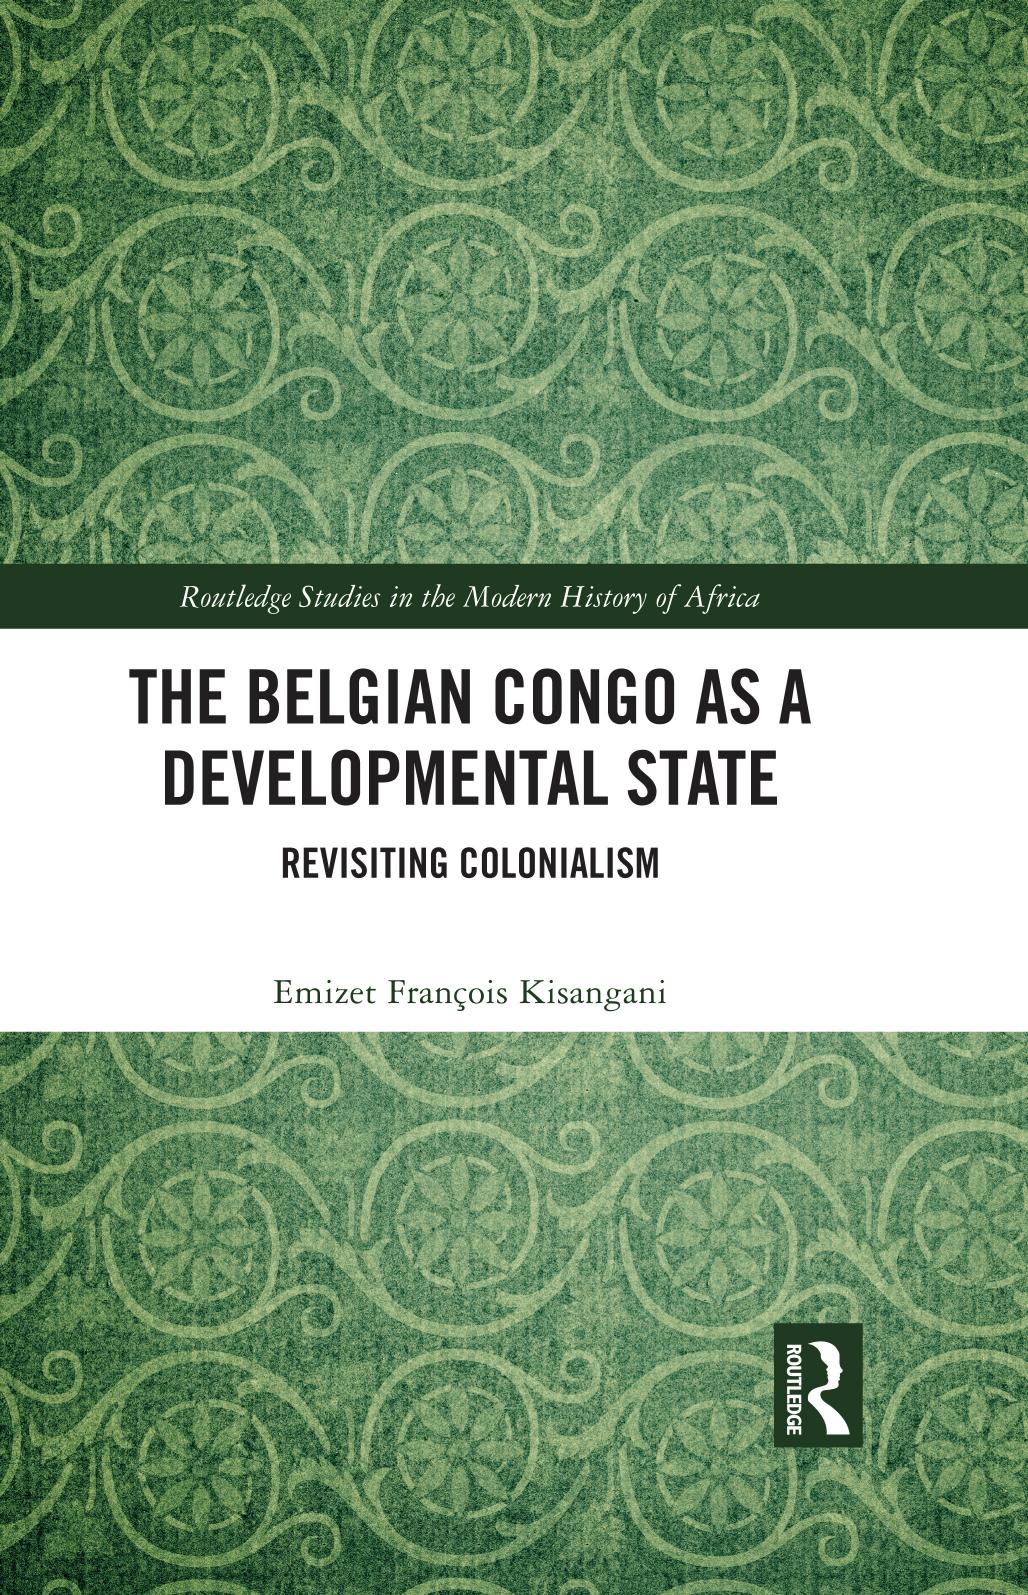 The Belgian Congo as a Developmental State: Revisiting Colonialism by Emizet François Kisangani